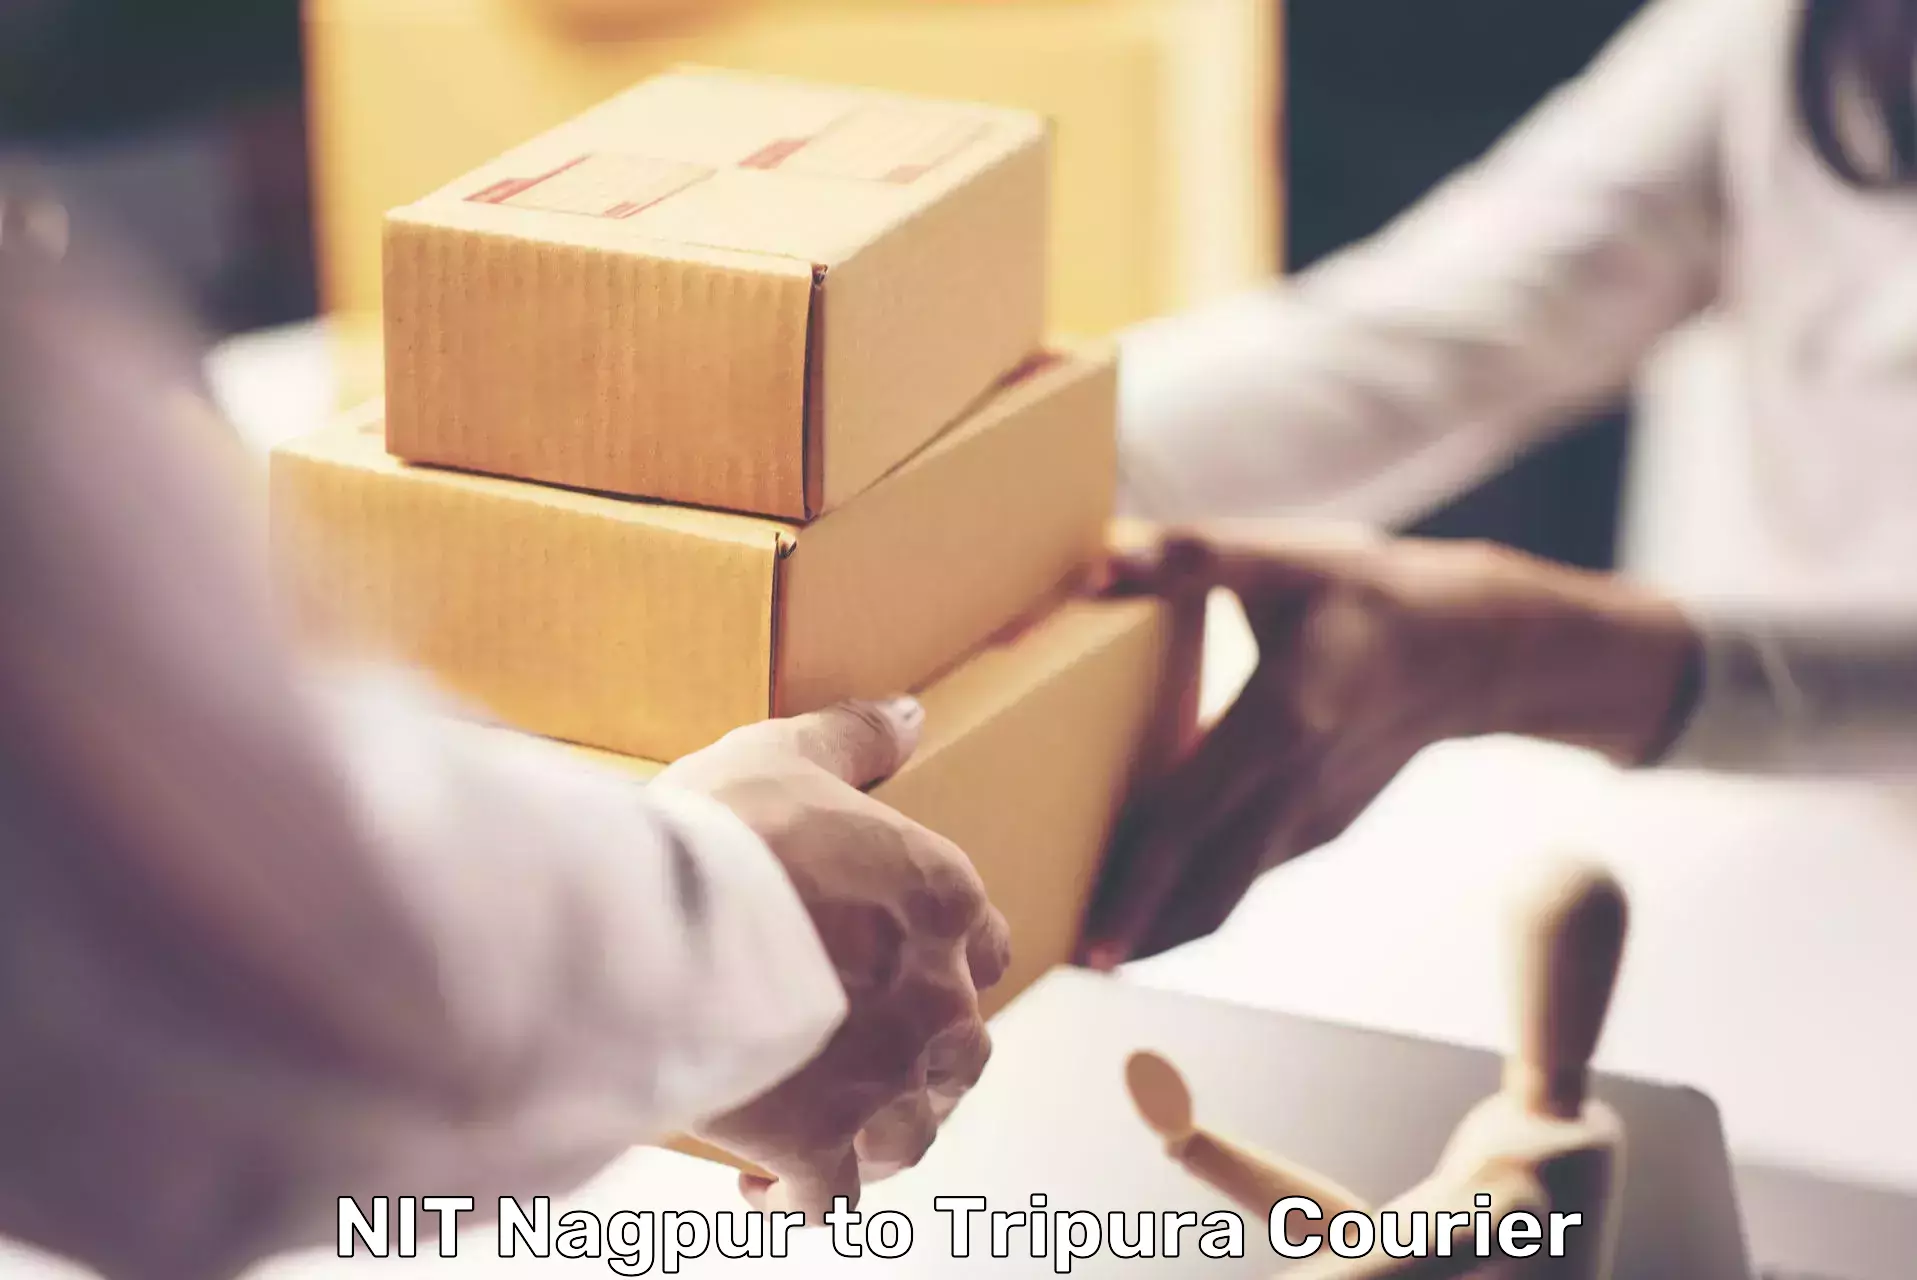 Global courier networks NIT Nagpur to Udaipur Tripura